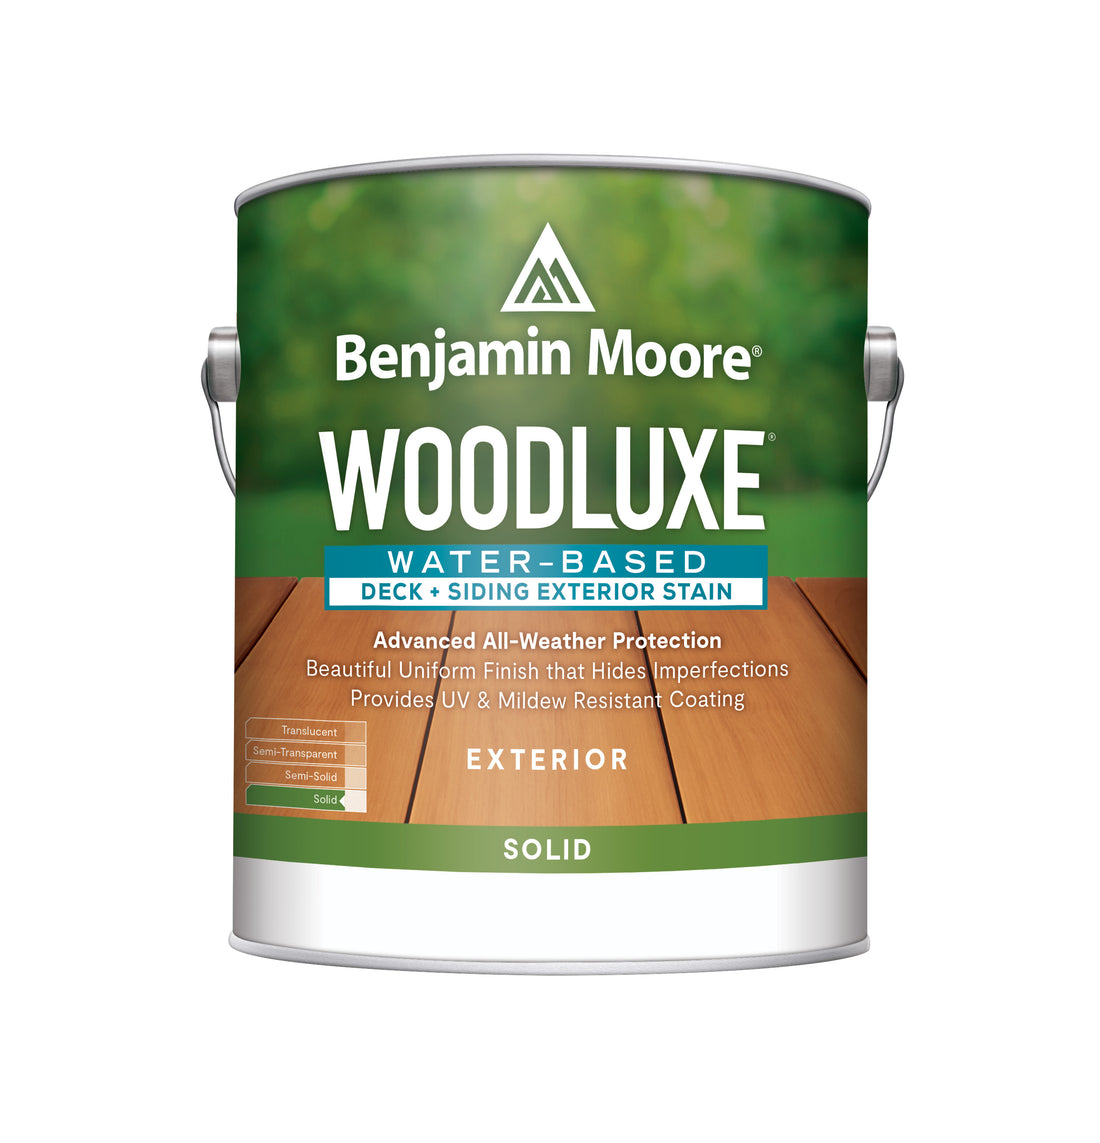 Benjamin Moore Woodluxe Solid Deck and Siding Stain 694